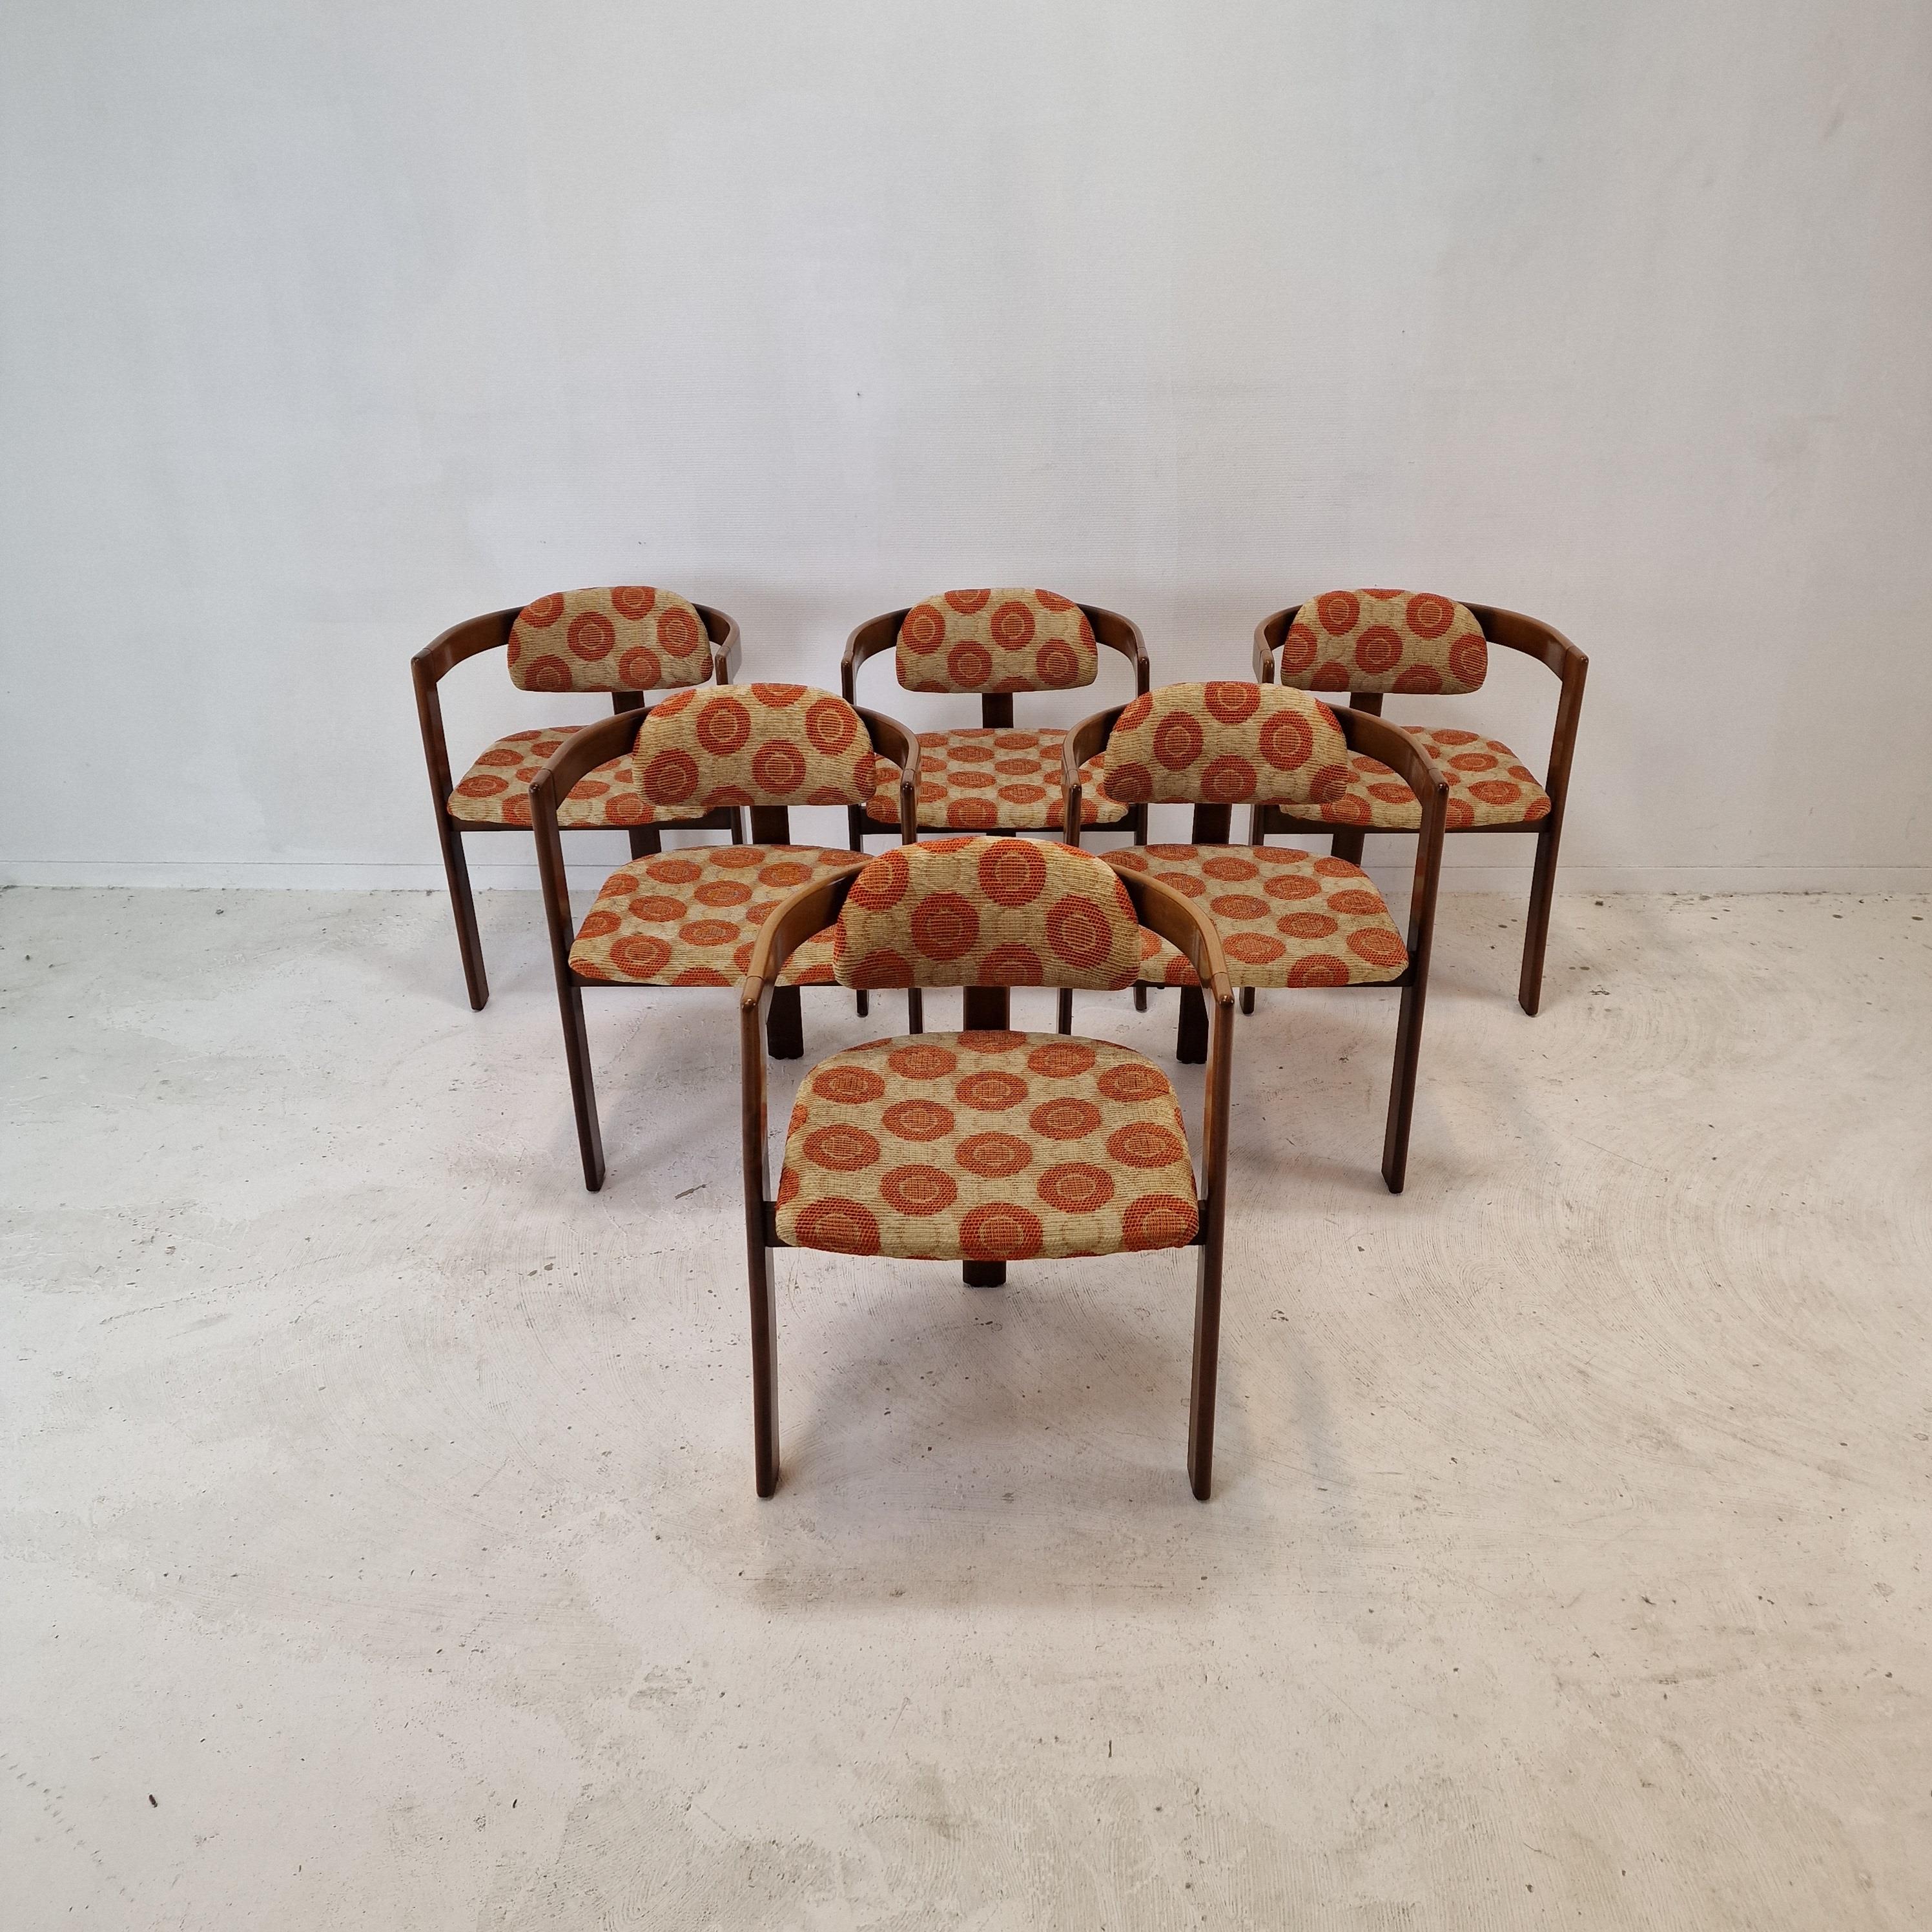 Midcentury Set of 6 Italian Wooden Armchairs, 1960's For Sale 1